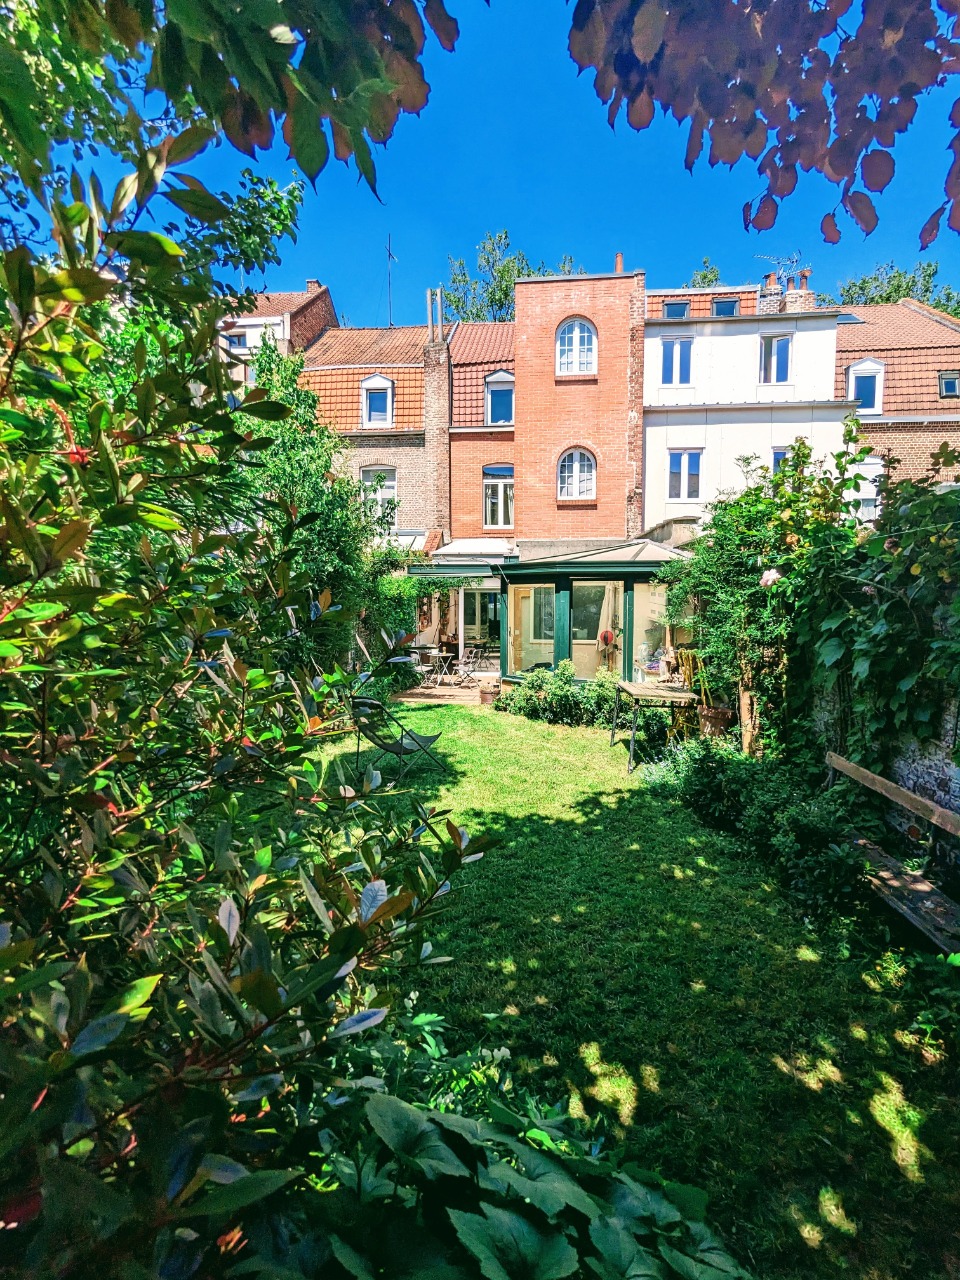 Superbe maison bourgeoise Photo 4 - JLW Immobilier